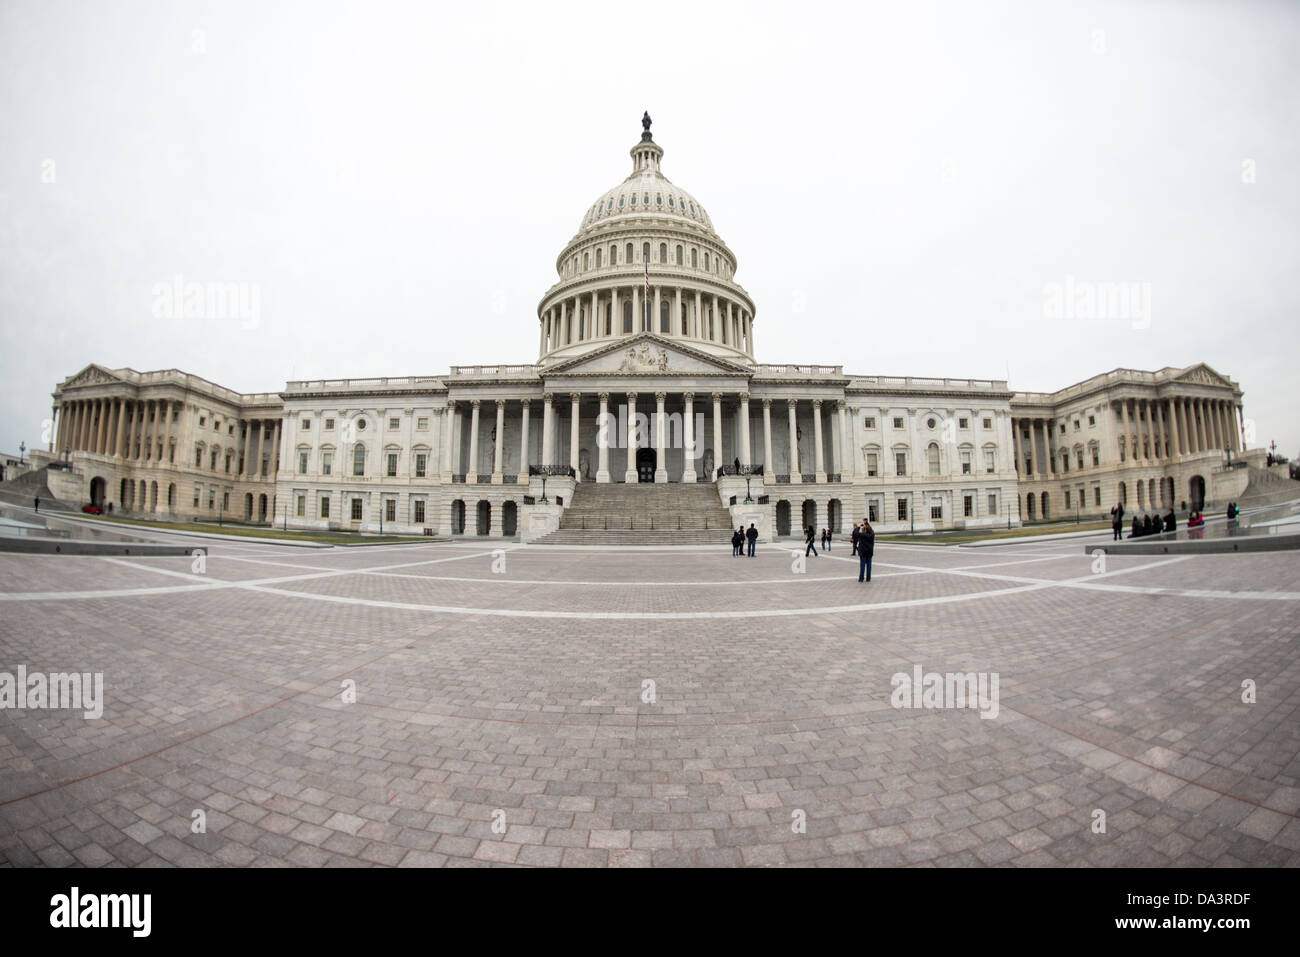 WASHINGTON DC, USA - Very wide-angle shot of the US Capitol Building's eastern side on an overcast day. Stock Photo